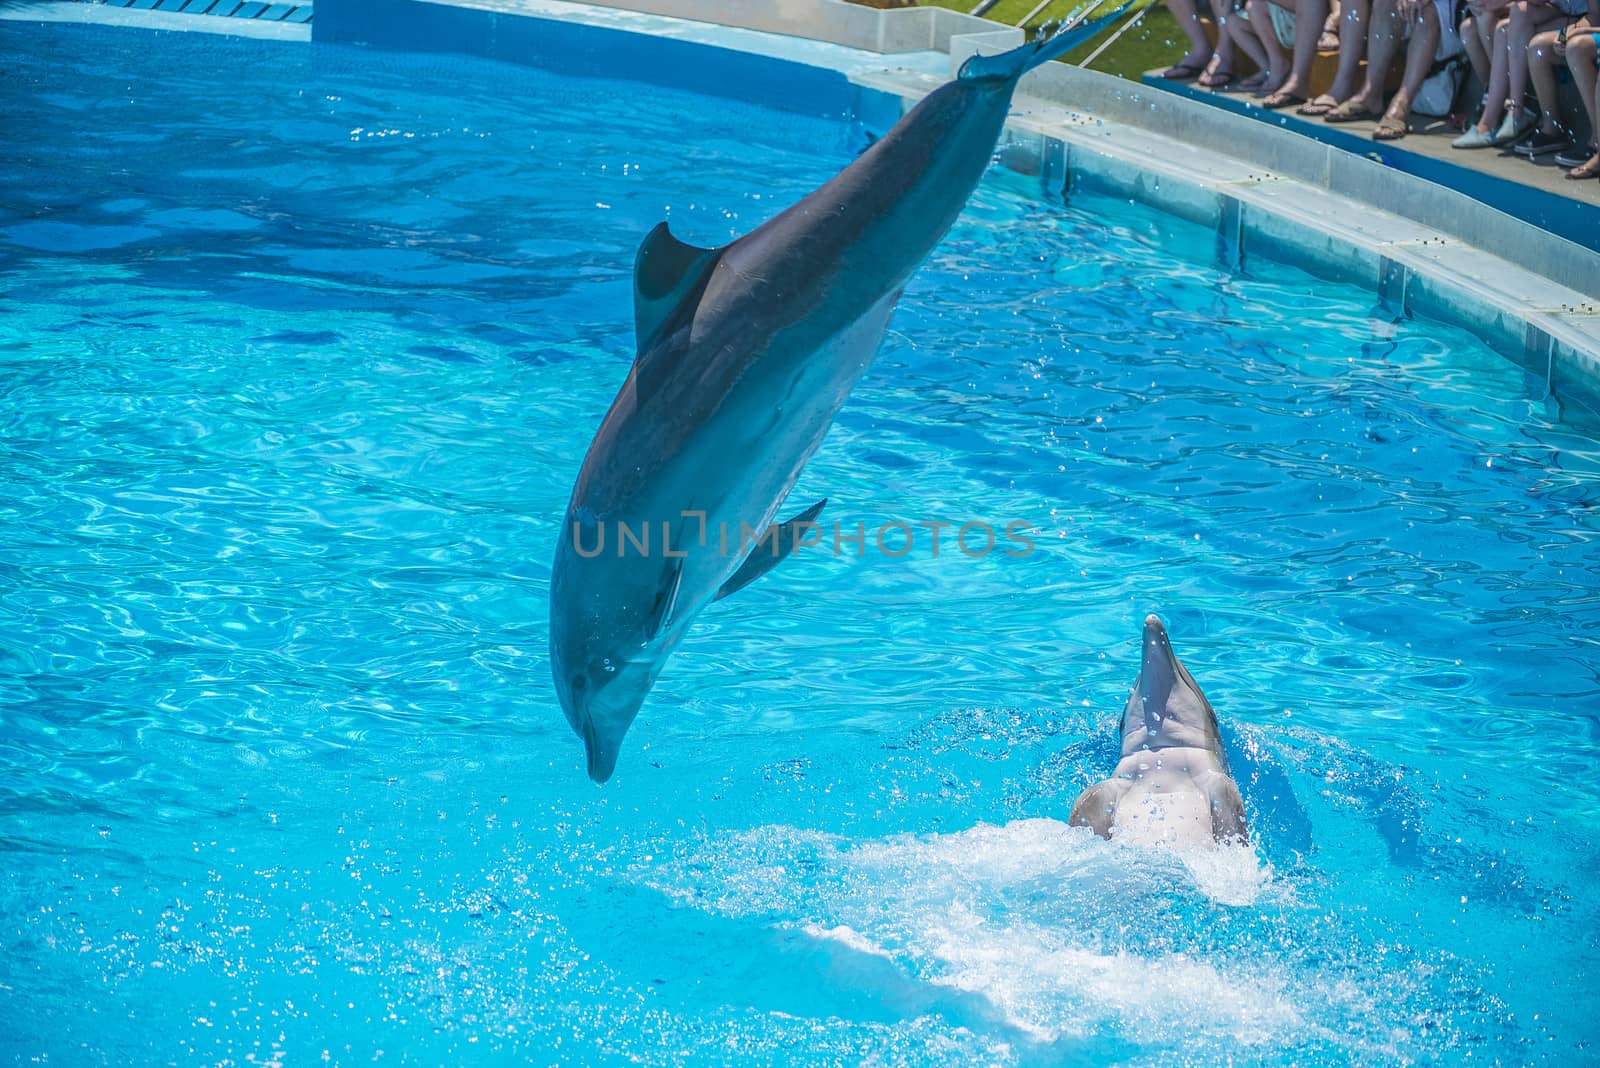 Dolphins jumping high in the air and it looks like they are flying. All the photos are shot July 25, 2013